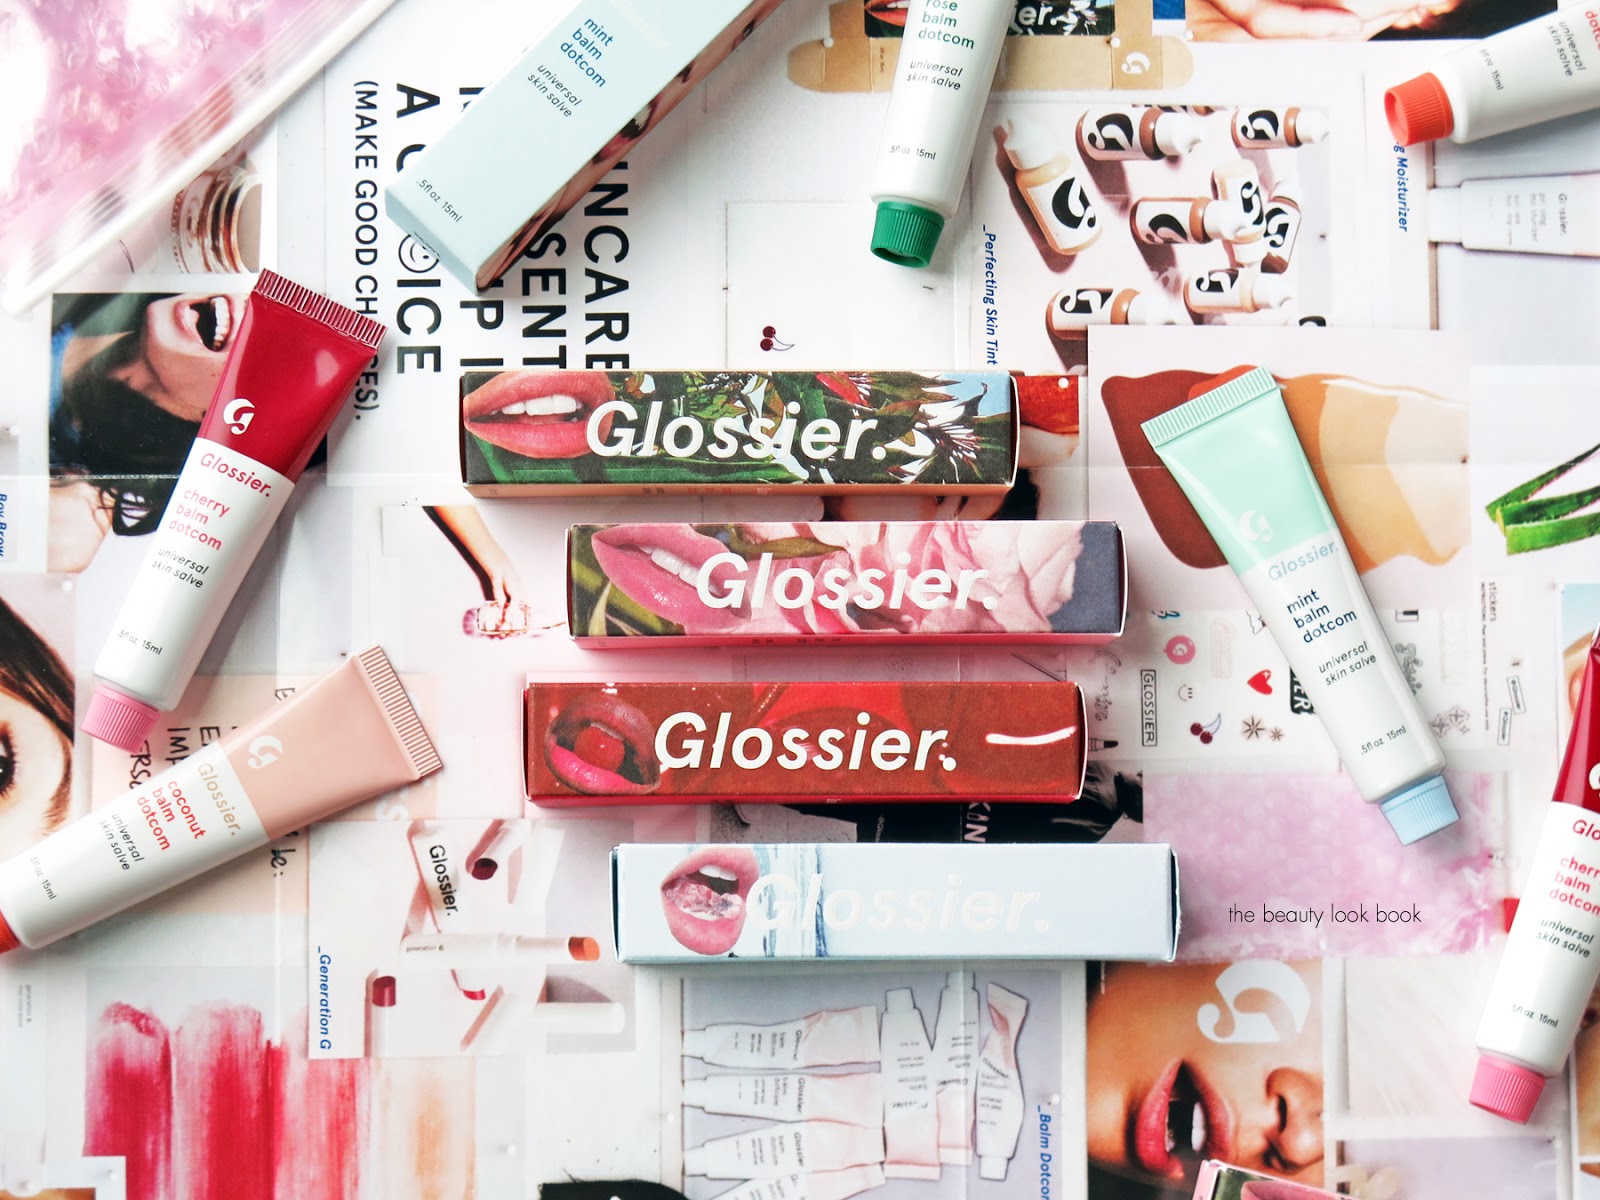 Glossier Archives The Beauty Look Book HD Wallpapers Download Free Images Wallpaper [wallpaper981.blogspot.com]